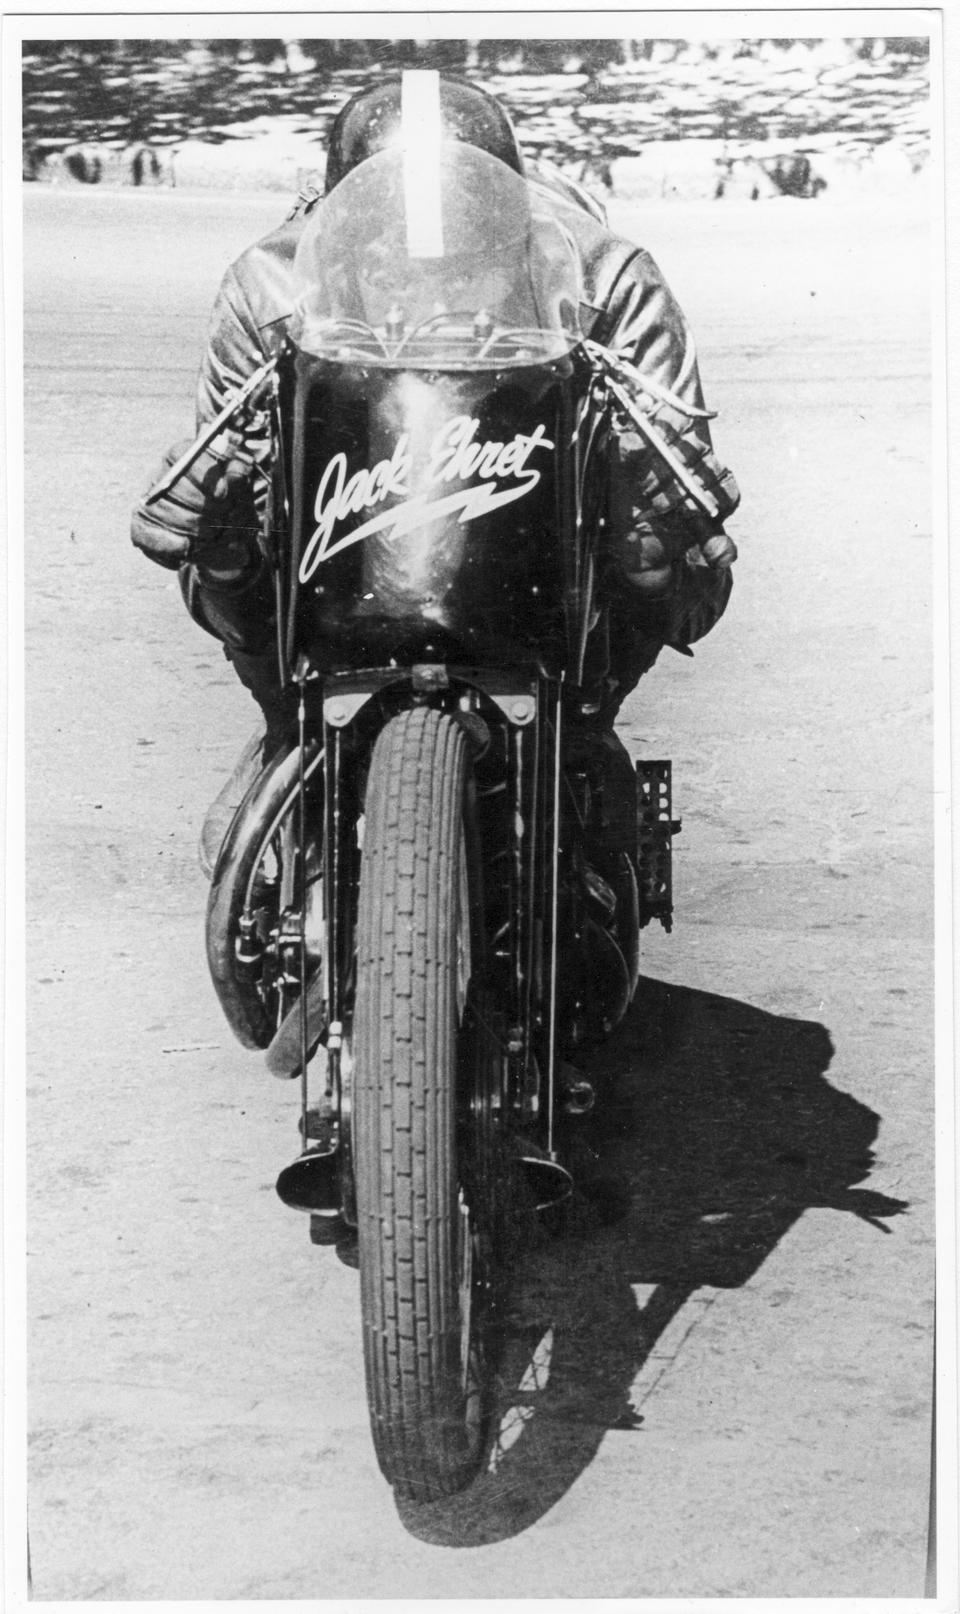 The ex-Tony McAlpine, Jack Ehret, Australian Land Speed Record Breaking, 4 owners from new,1951 Vincent 998cc Black Lightning